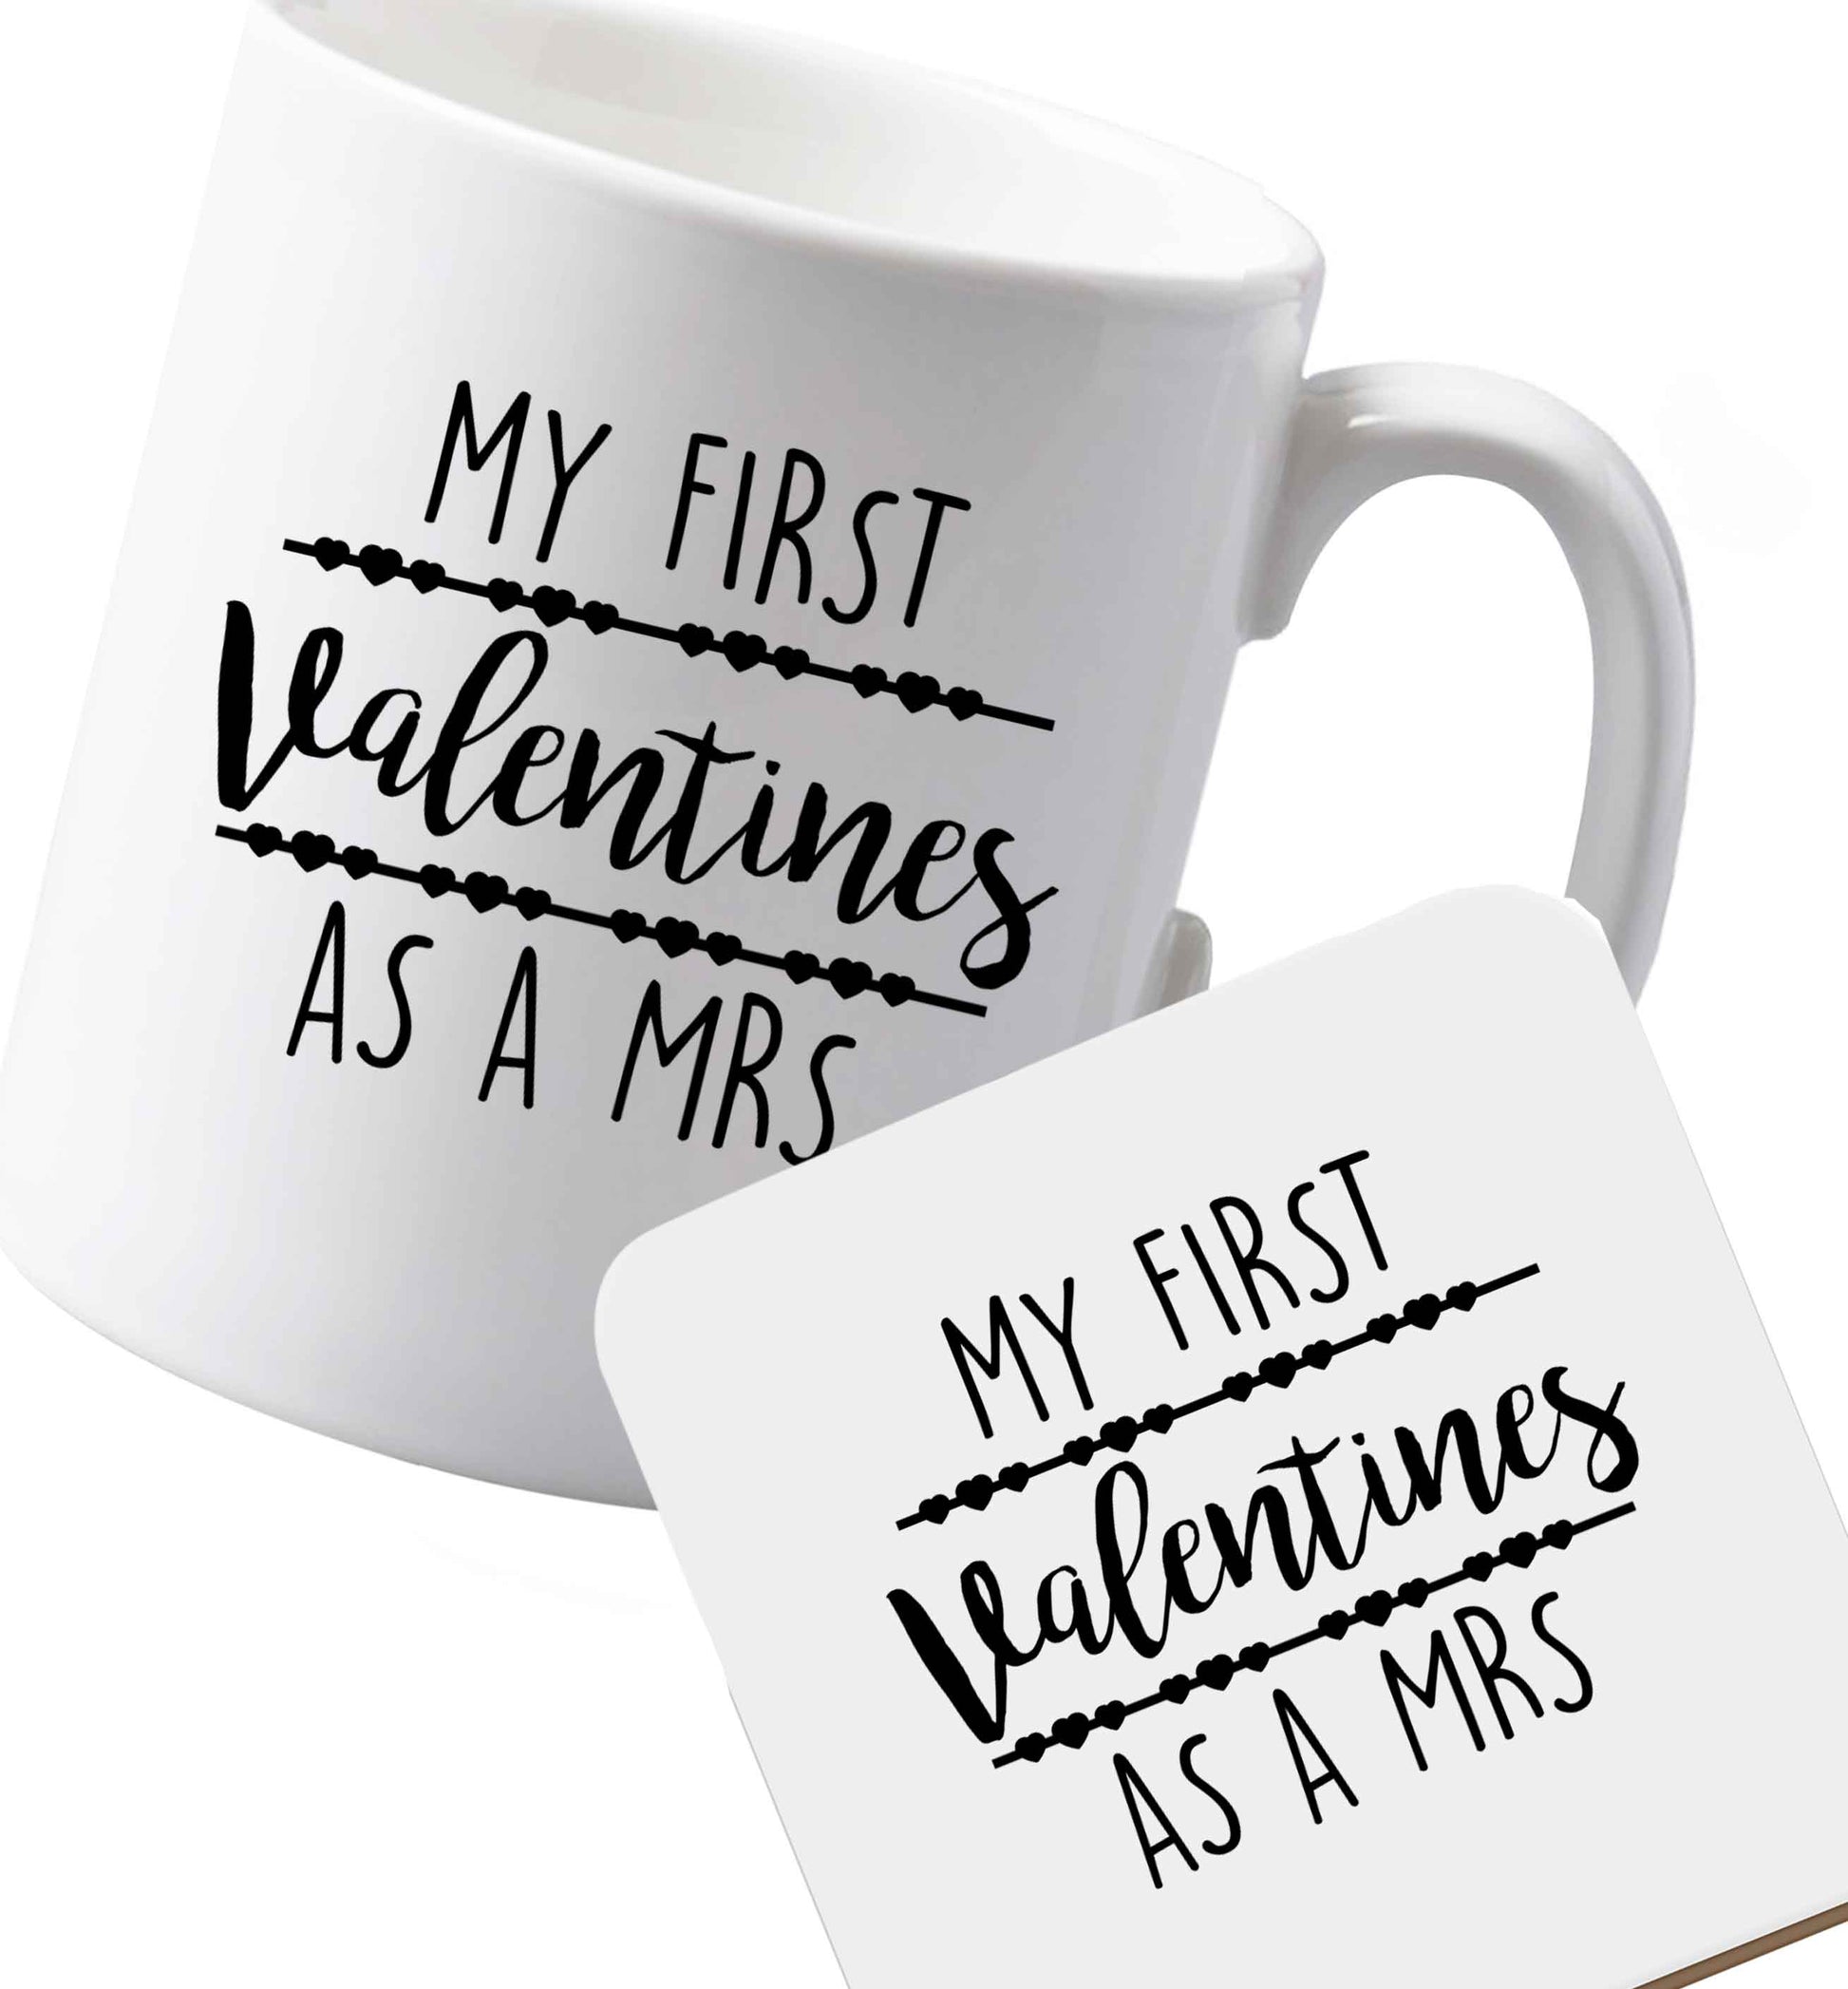 10 oz Ceramic mug and coaster My first valentines as a Mrs both sides